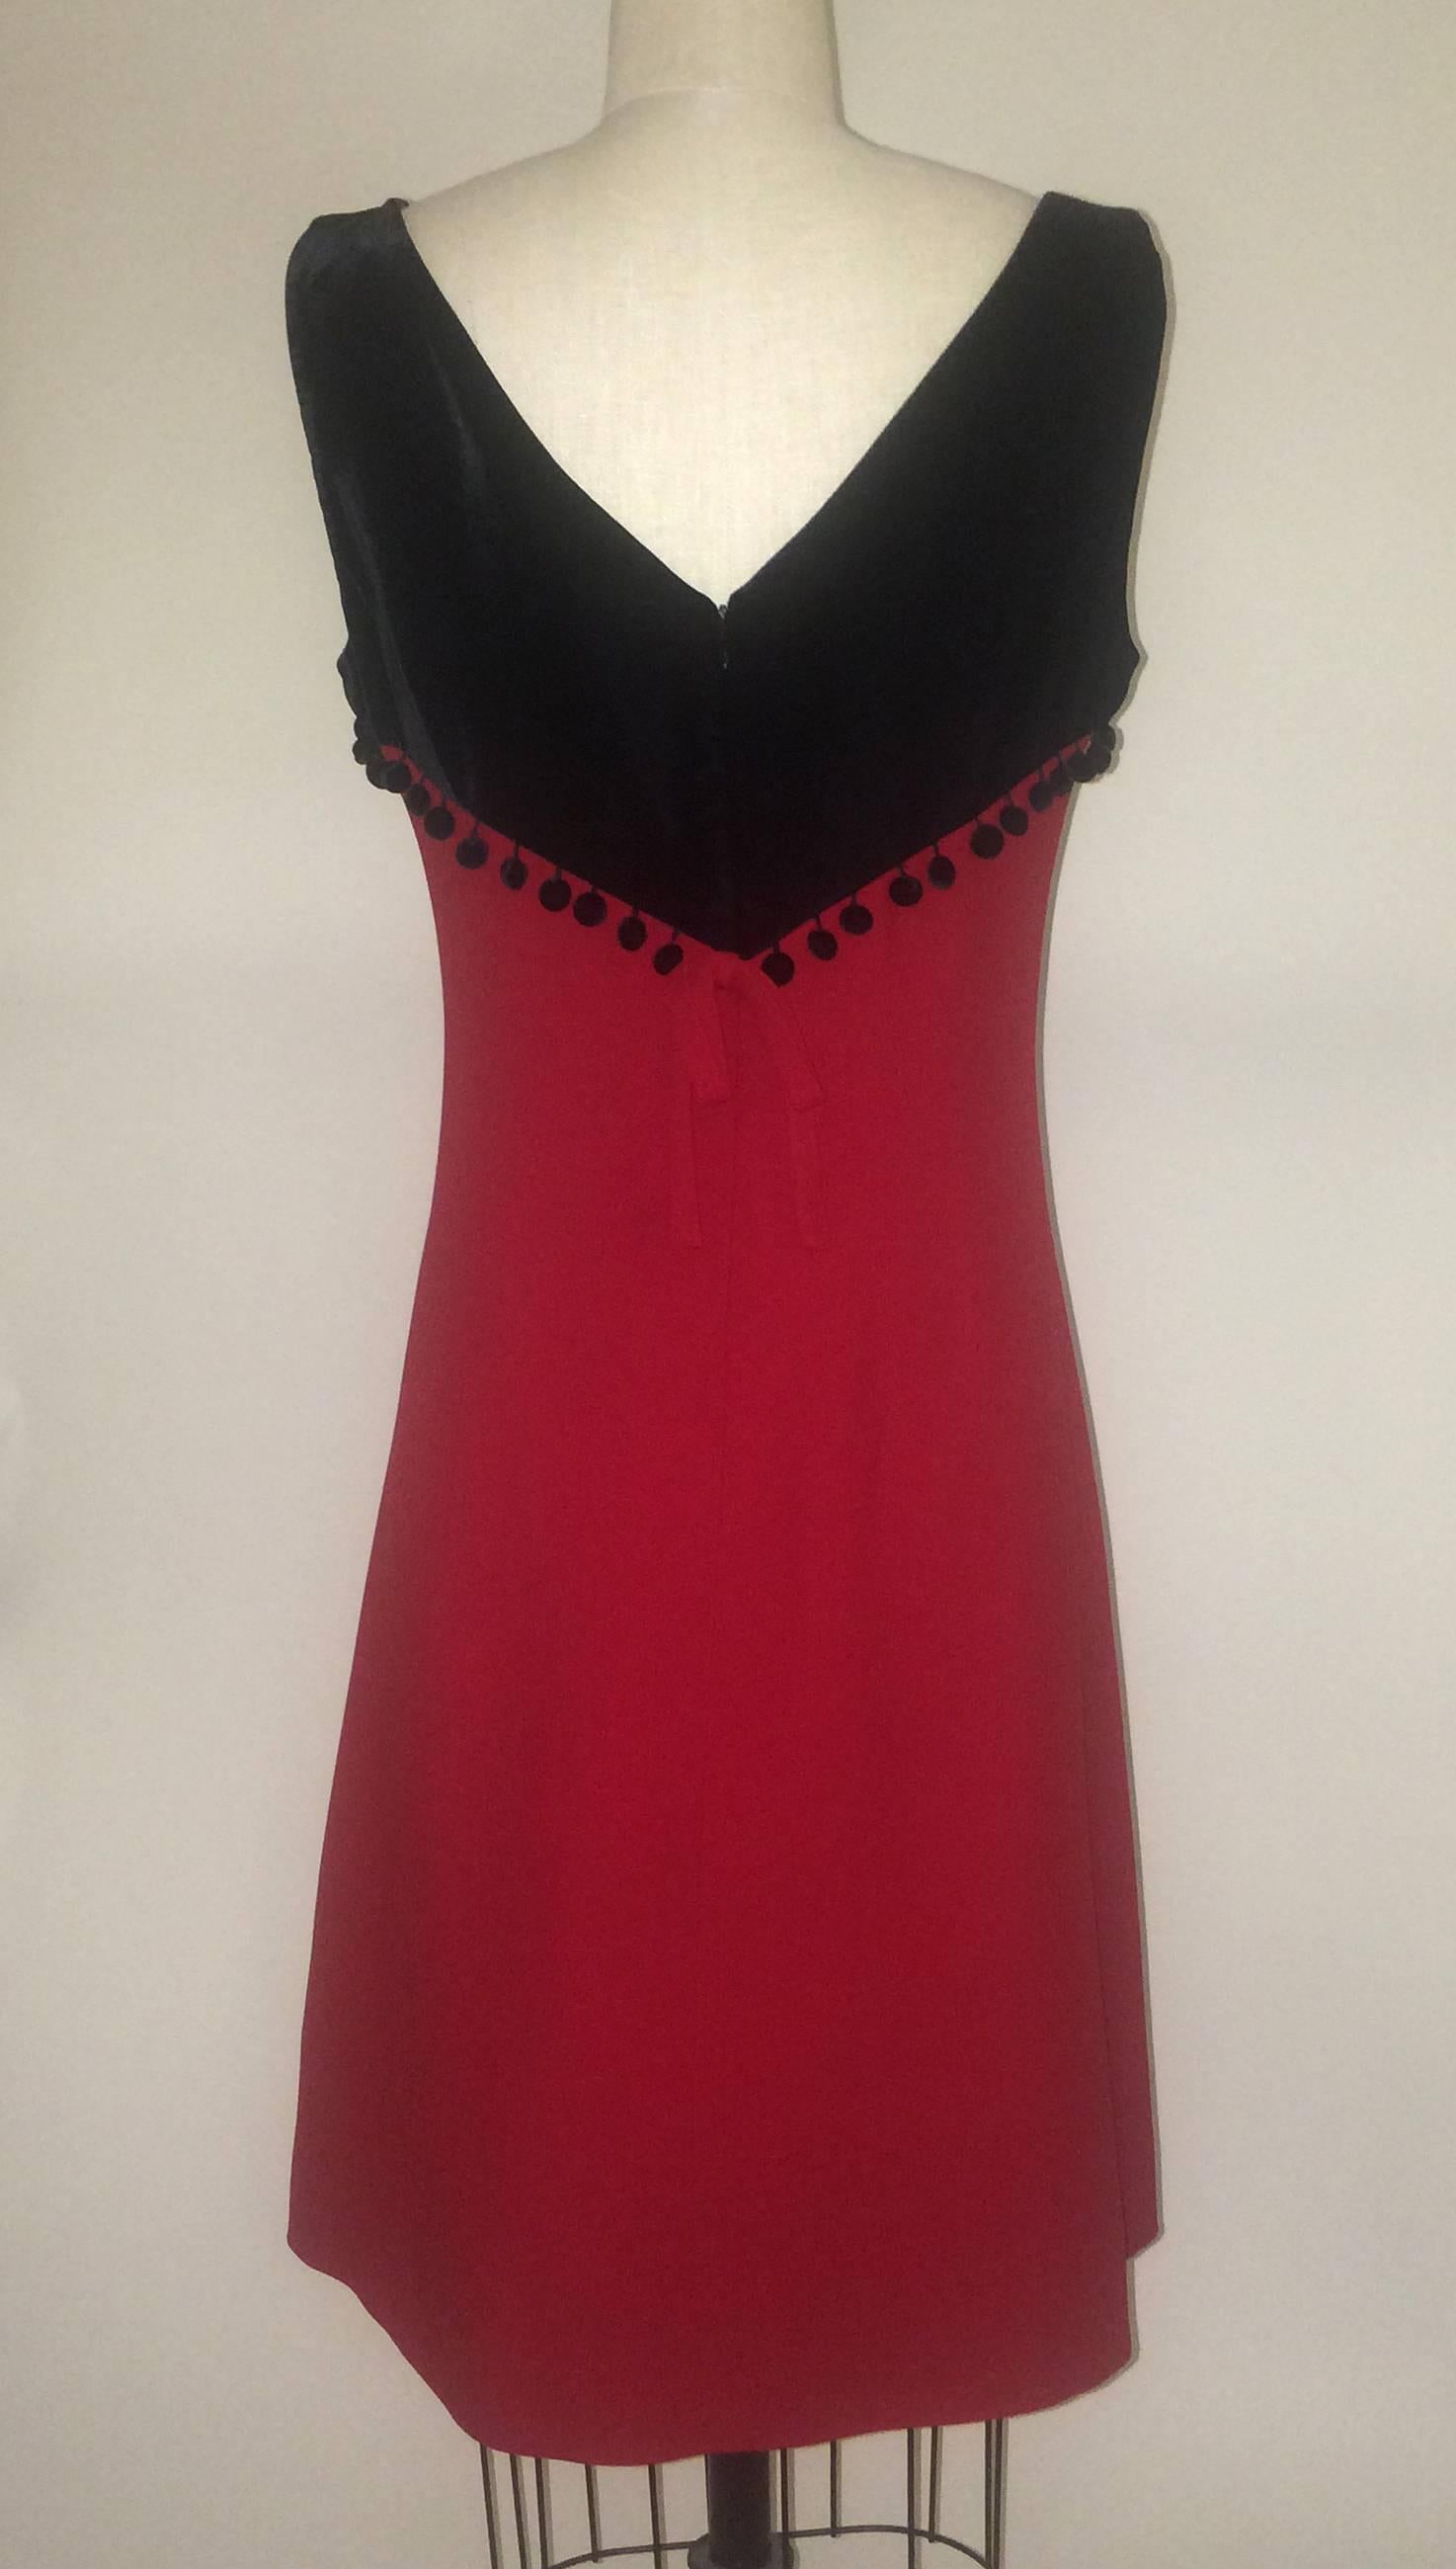 Moschino Cheap & Chic vintage 1990s red dress with black velvet top featuring pom pom trim from Bergdorf Goodman. Small red bow at back.Back zip and hook and eye.

Skirt: 52% rayon, 48% acetate.
Bodice: 59% rayon, 41% cotton.
Fully lined in 60%